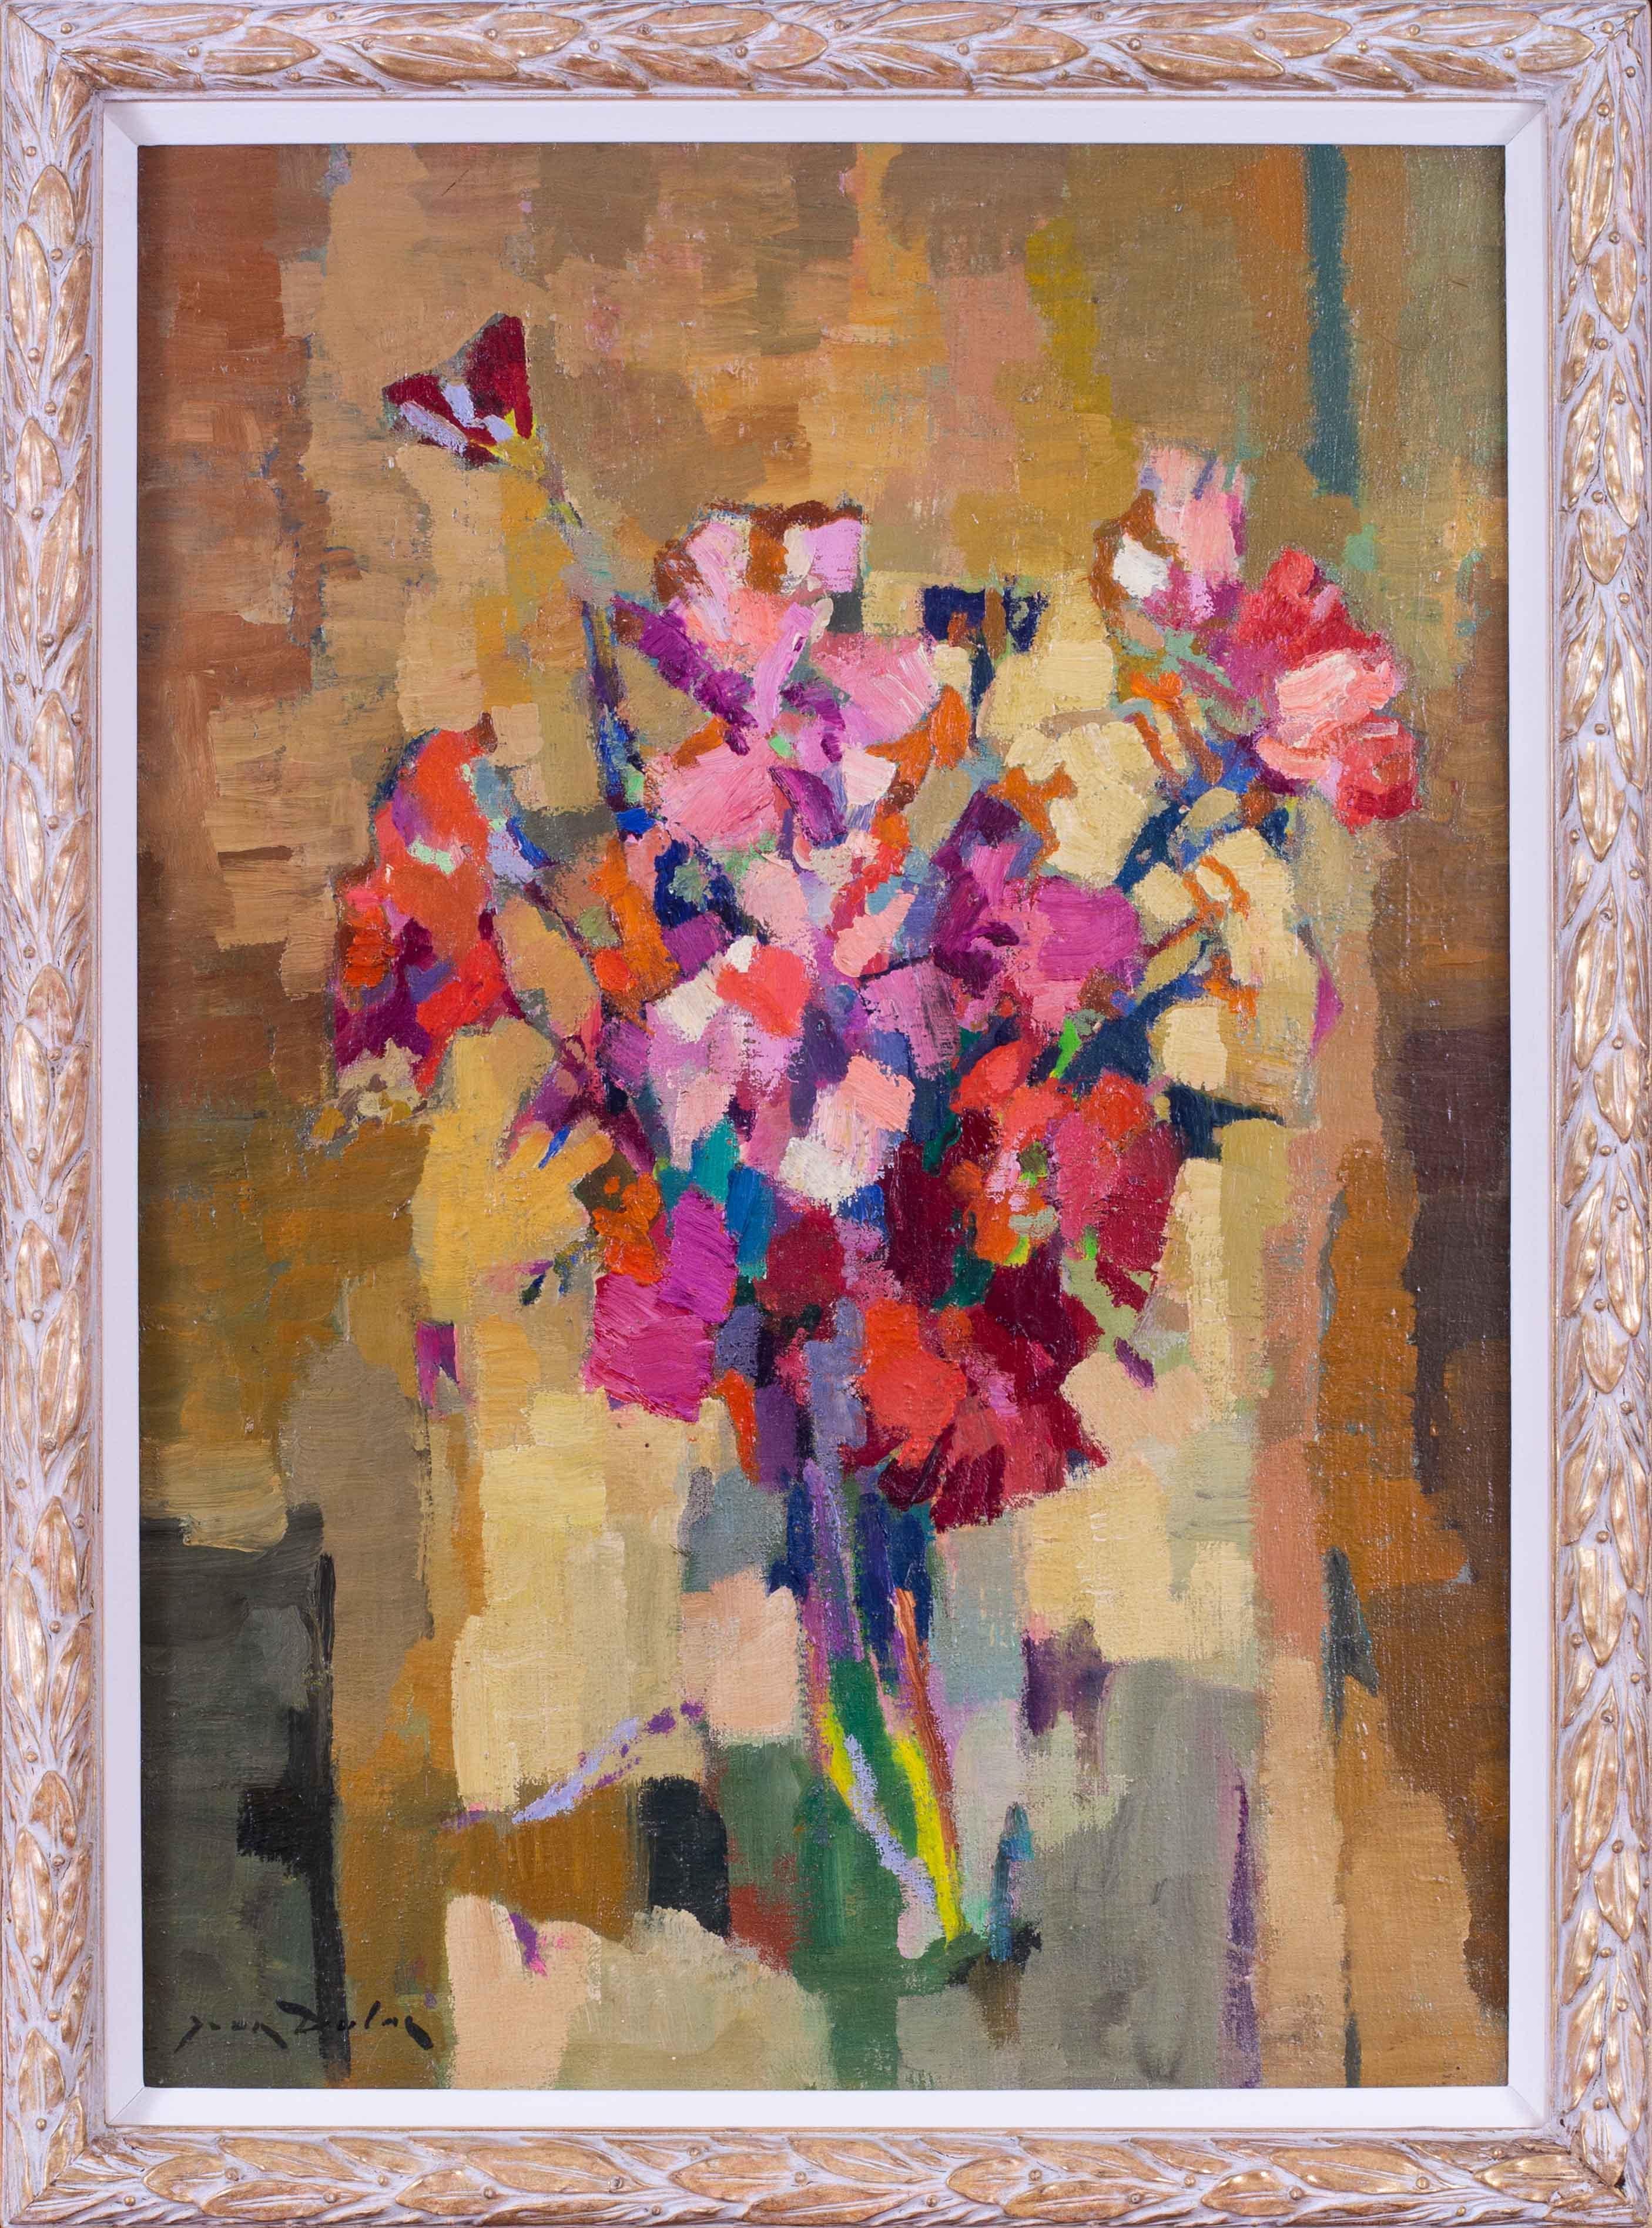 A rich and very decorative Post Impressionist still life by the Lyonnais 20th Century artist Jean Dulac.

The details of the work are as follows:
Jean Dulac (French, 1902-1968) 
Bouquet in reds and pinks
Oil on canvas
Signed ‘Jean Dulac’ (lower